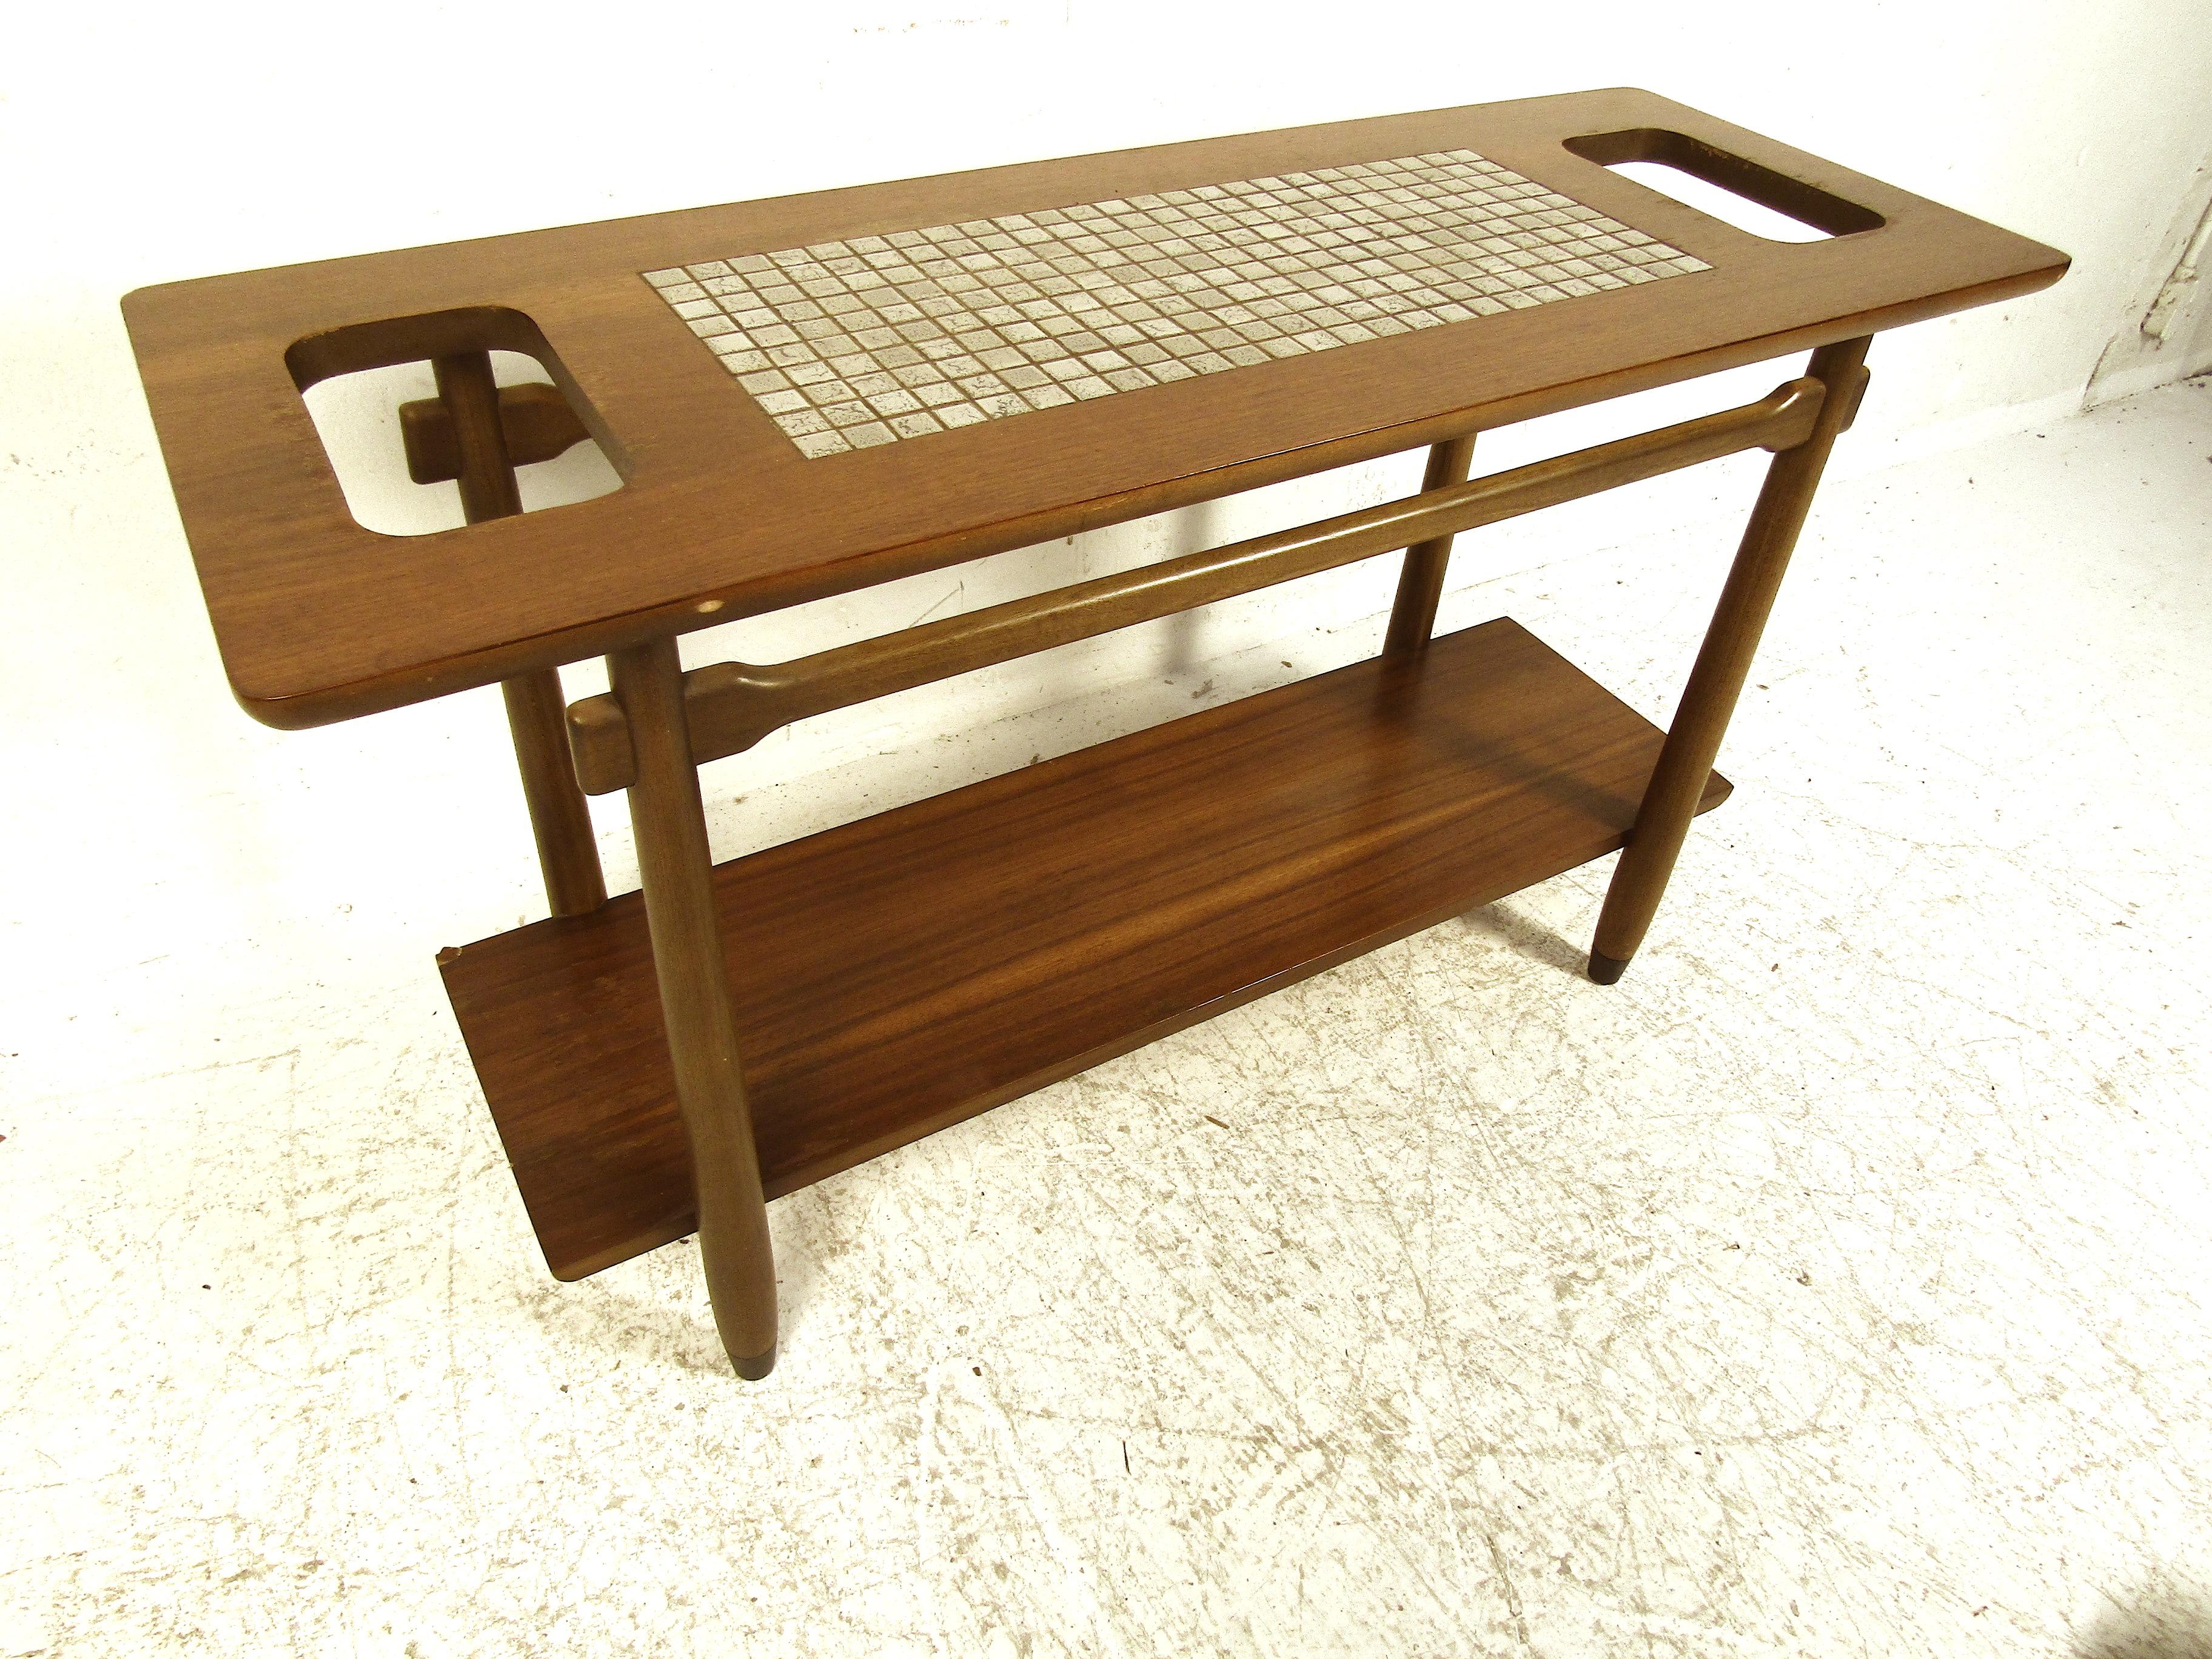 This handsome midcentury sofa table features clean lines with a ceramic tile inlay on top. Perfect for light entertaining or to accent a dining/ living room. Sturdy construction and durable materials ensure this piece will last for years to come.